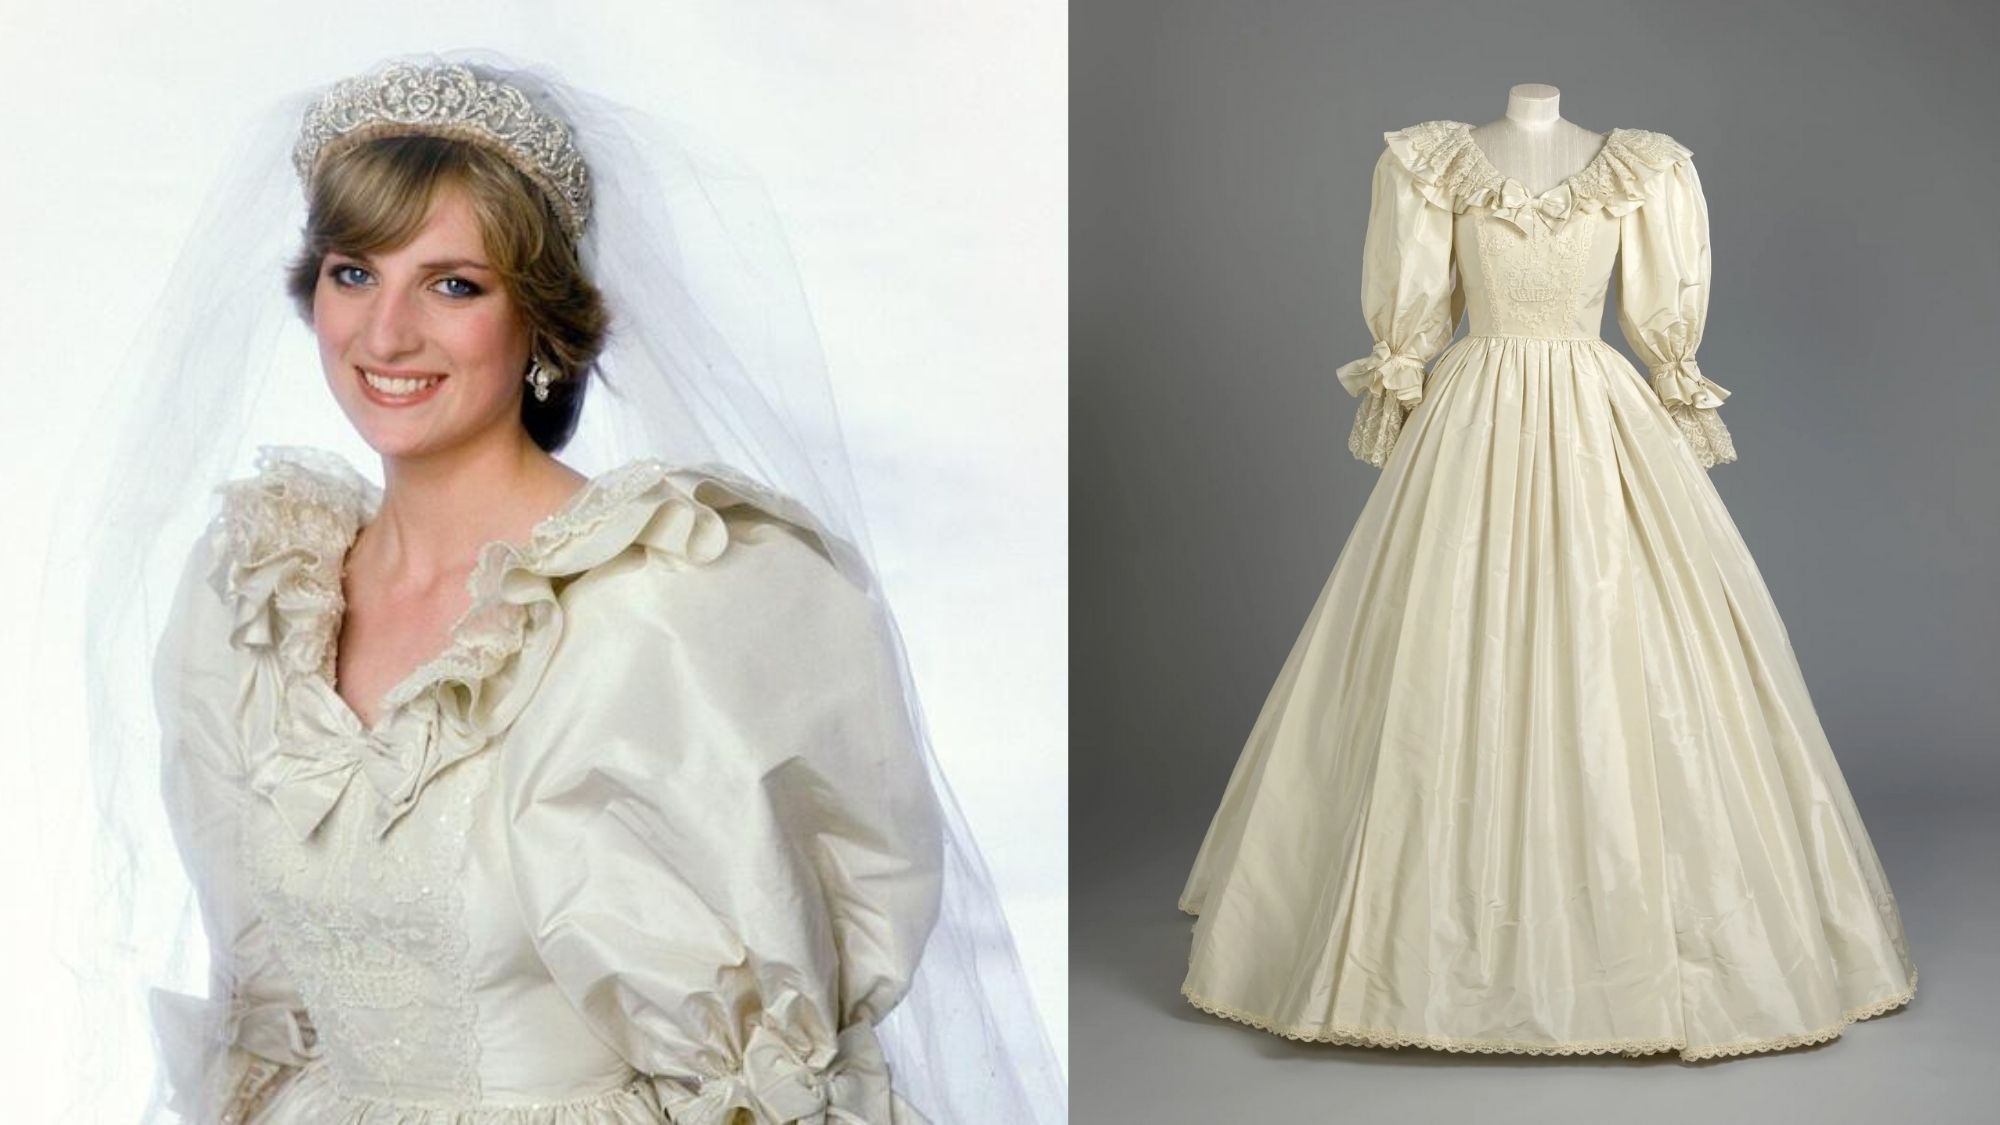 Princess Diana's iconic wedding dress to be a part of the "Royal Style in the Making" exhibition